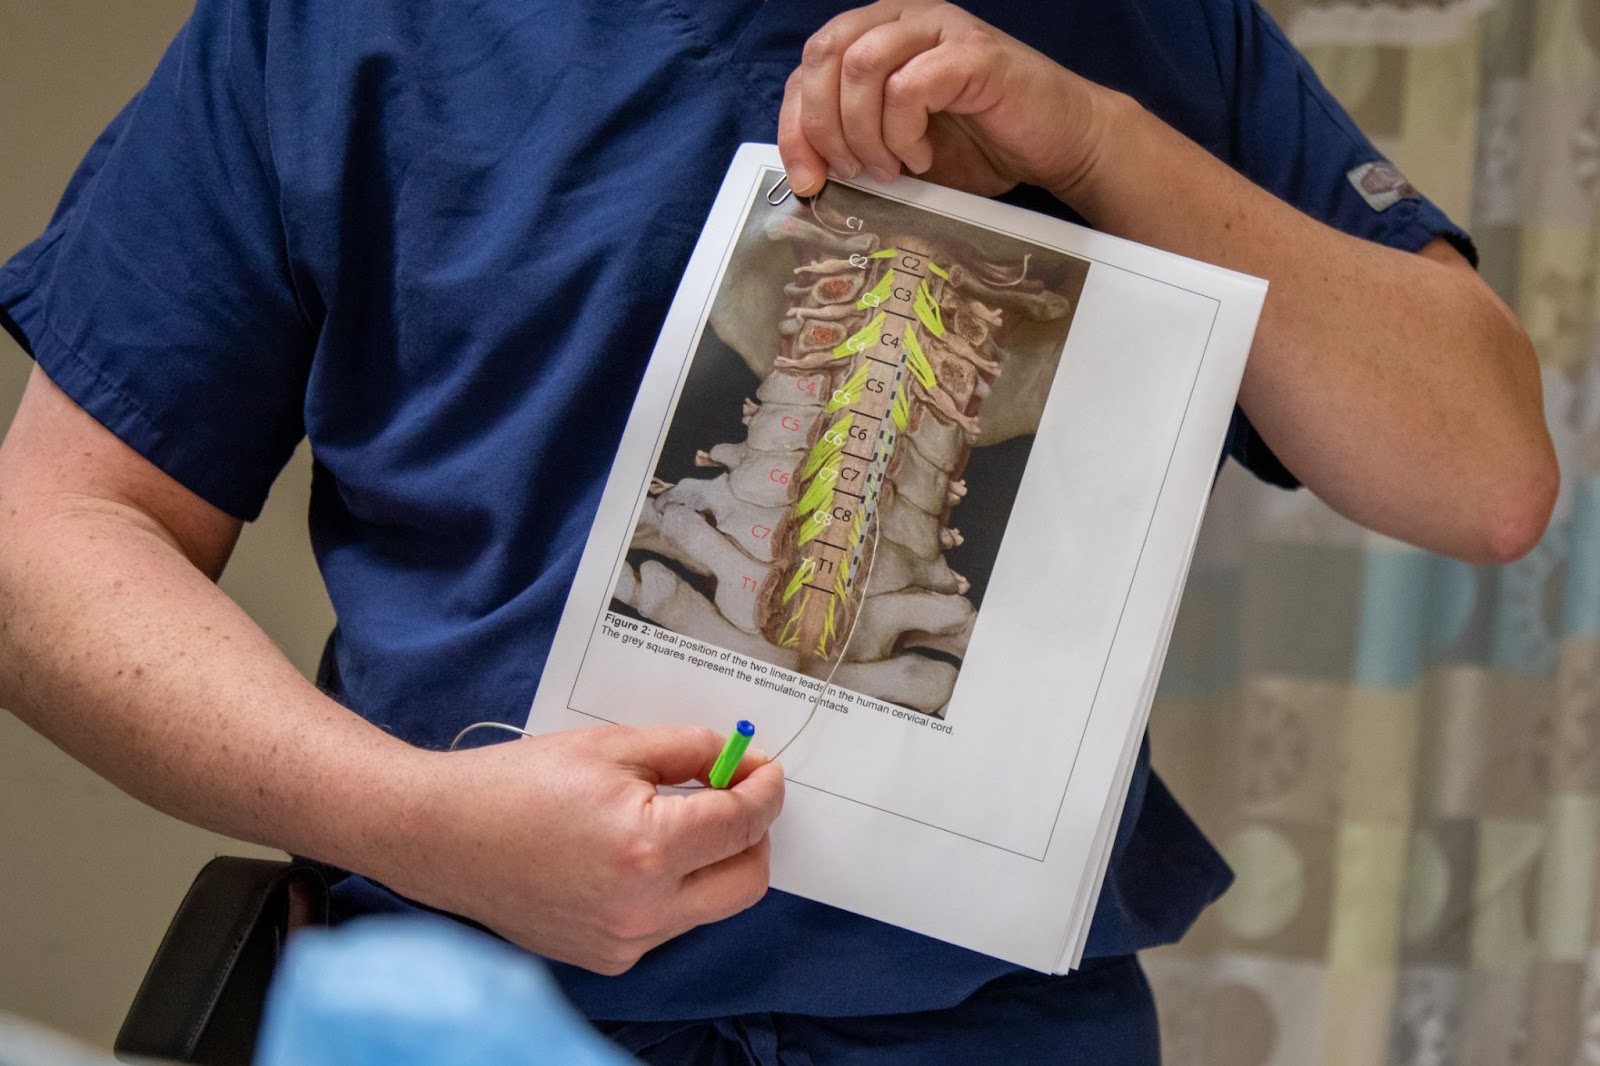 a doctor pointing at the location of electrodes in an image of a neck skeleton